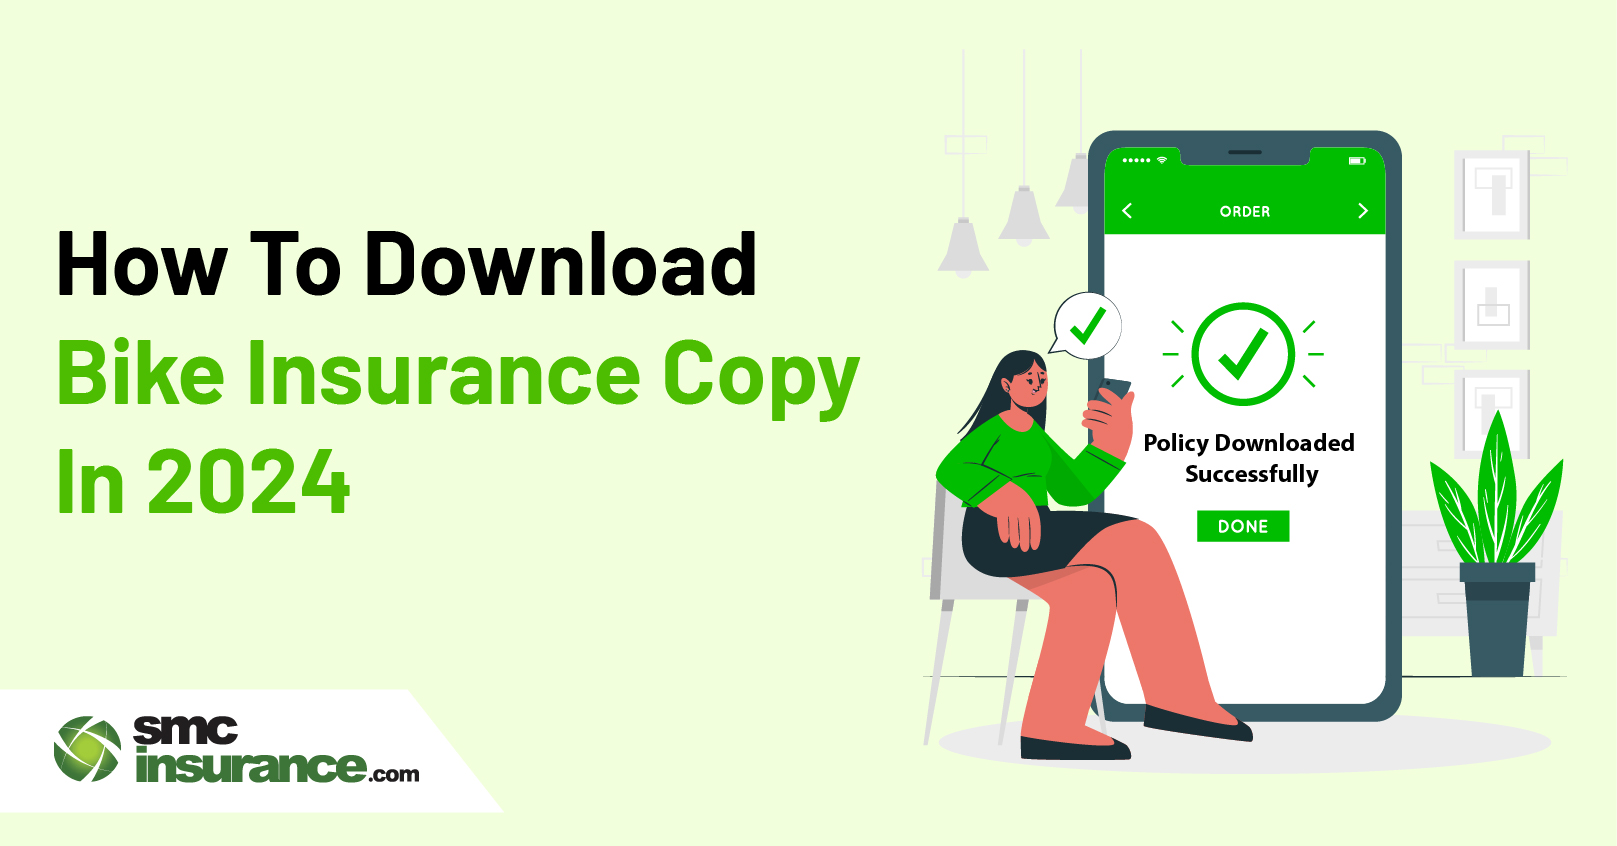 How To Download Bike Insurance Copy In 2024?